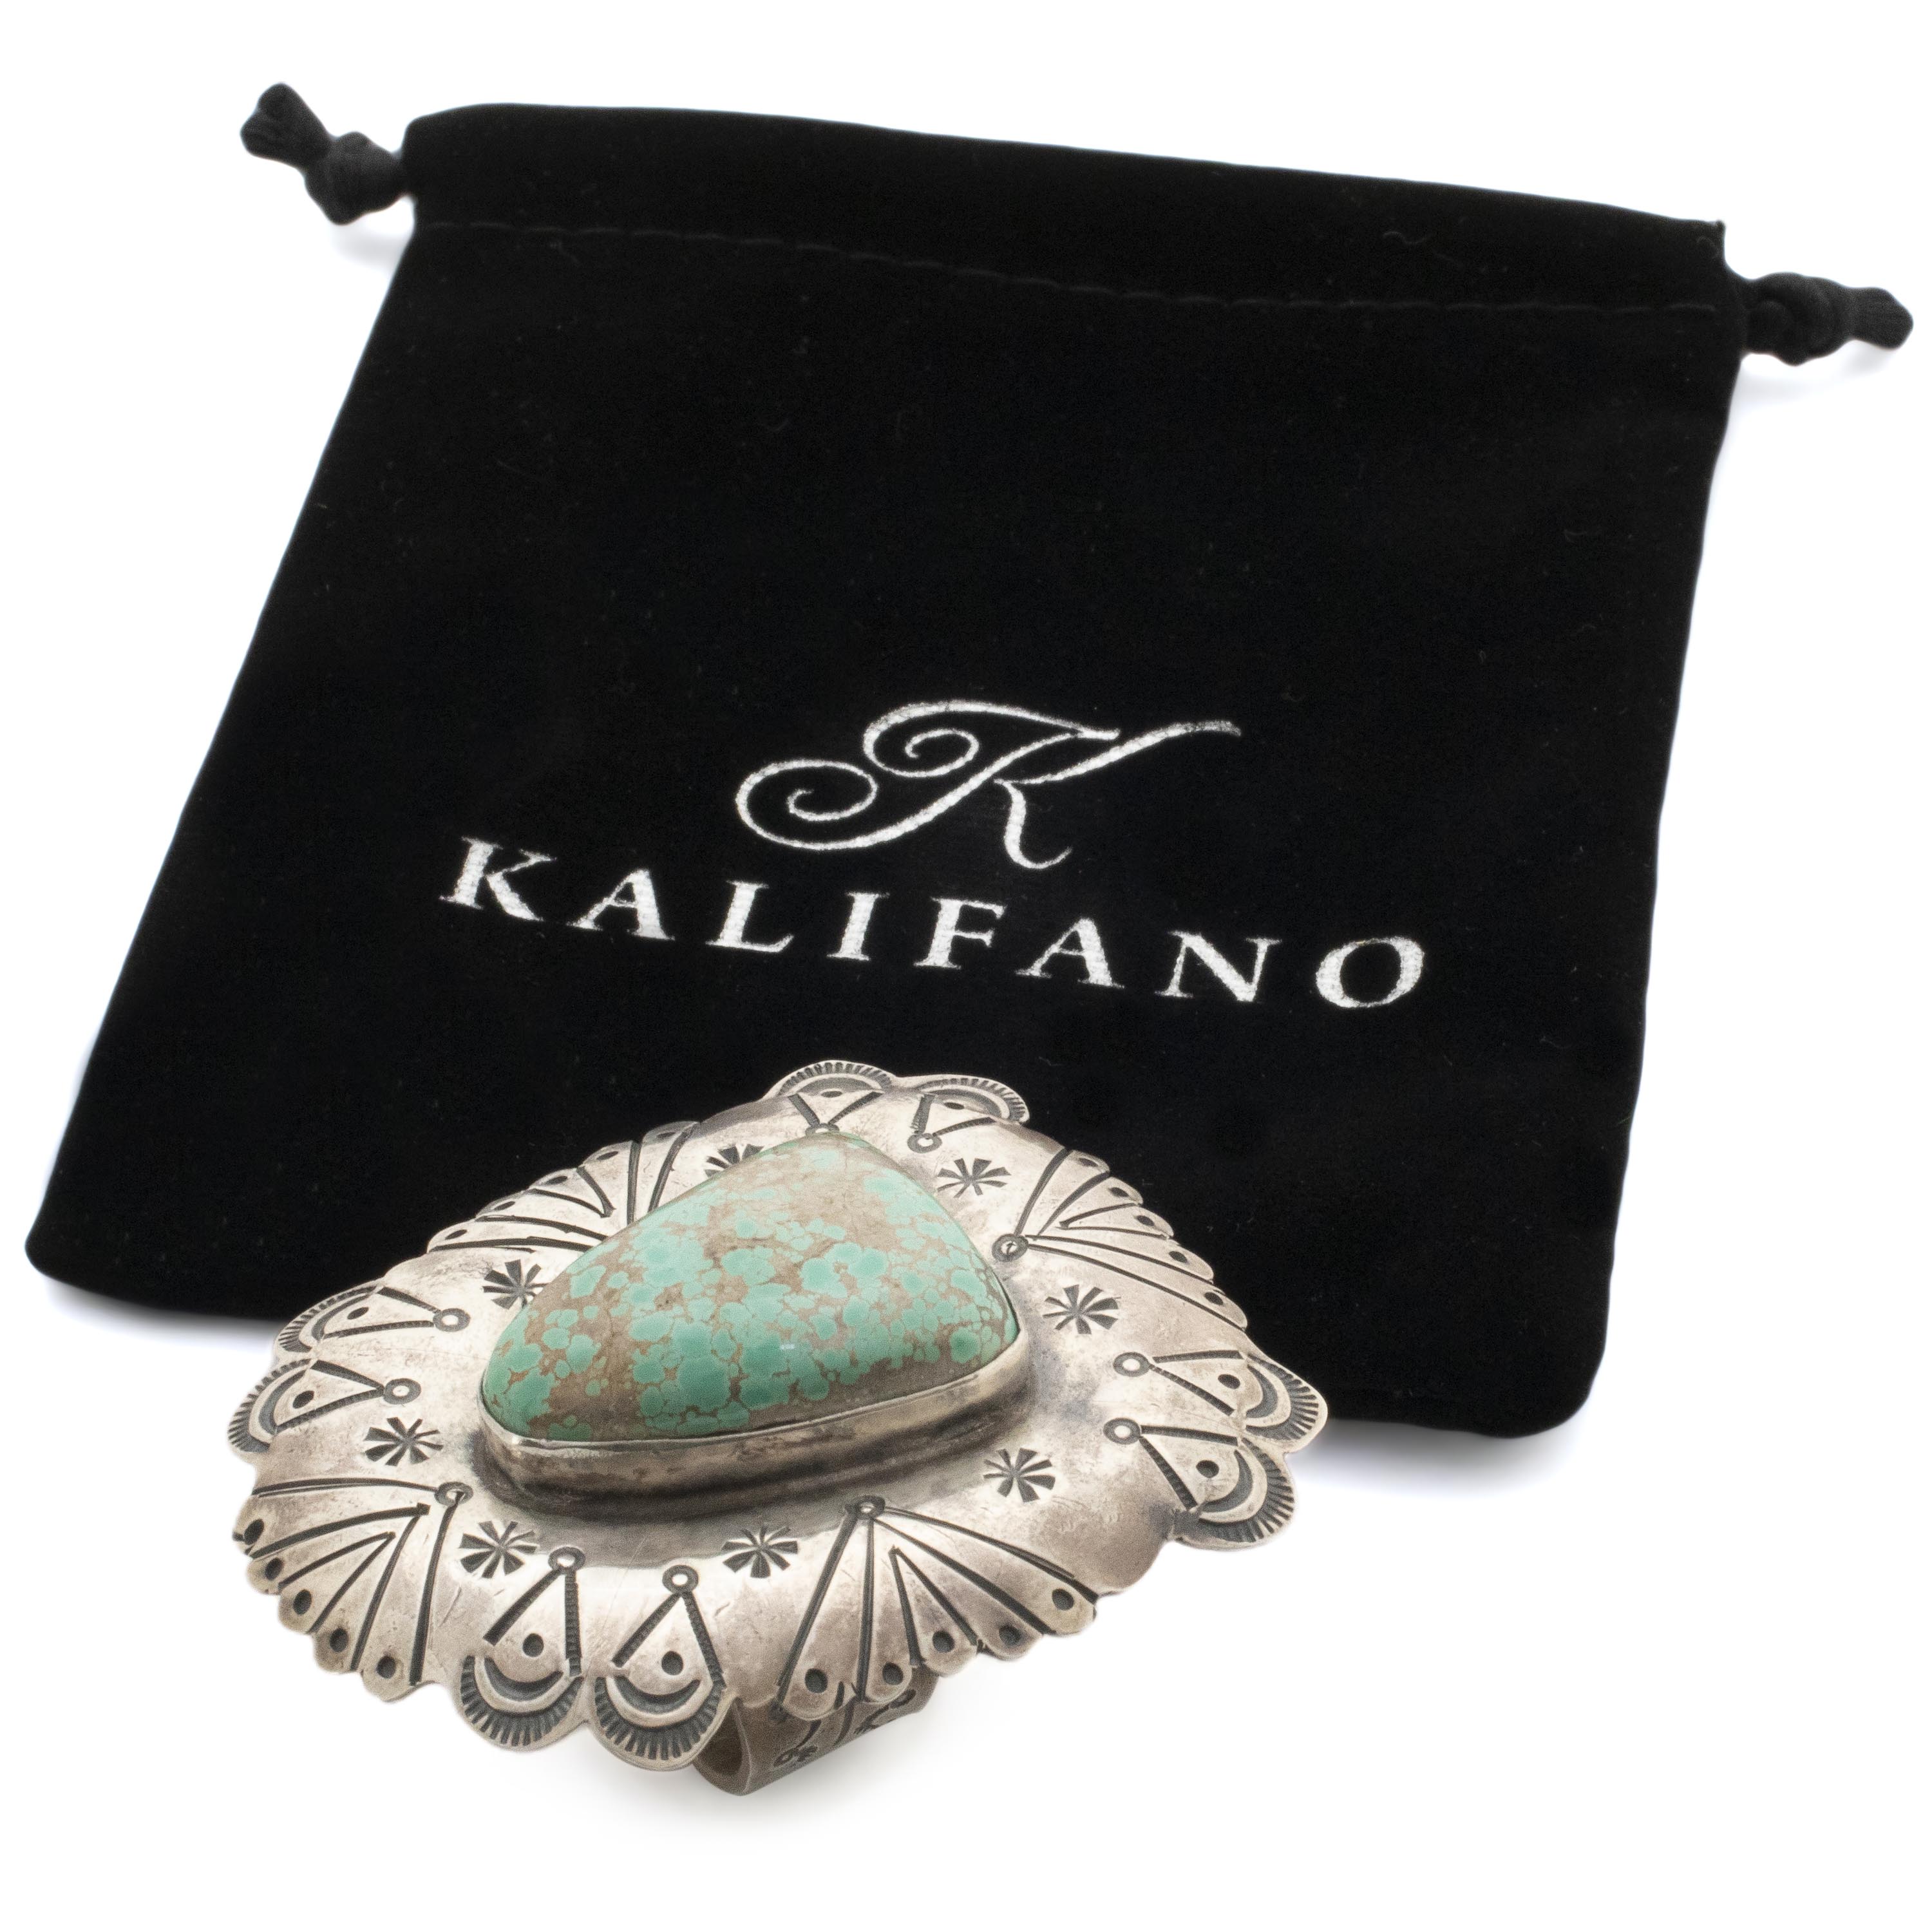 Kalifano Native American Jewelry 11 Marvin McReeves Navajo Carico Lake Turquoise USA Native American Made 925 Sterling Silver Ring NAR2400.013.11